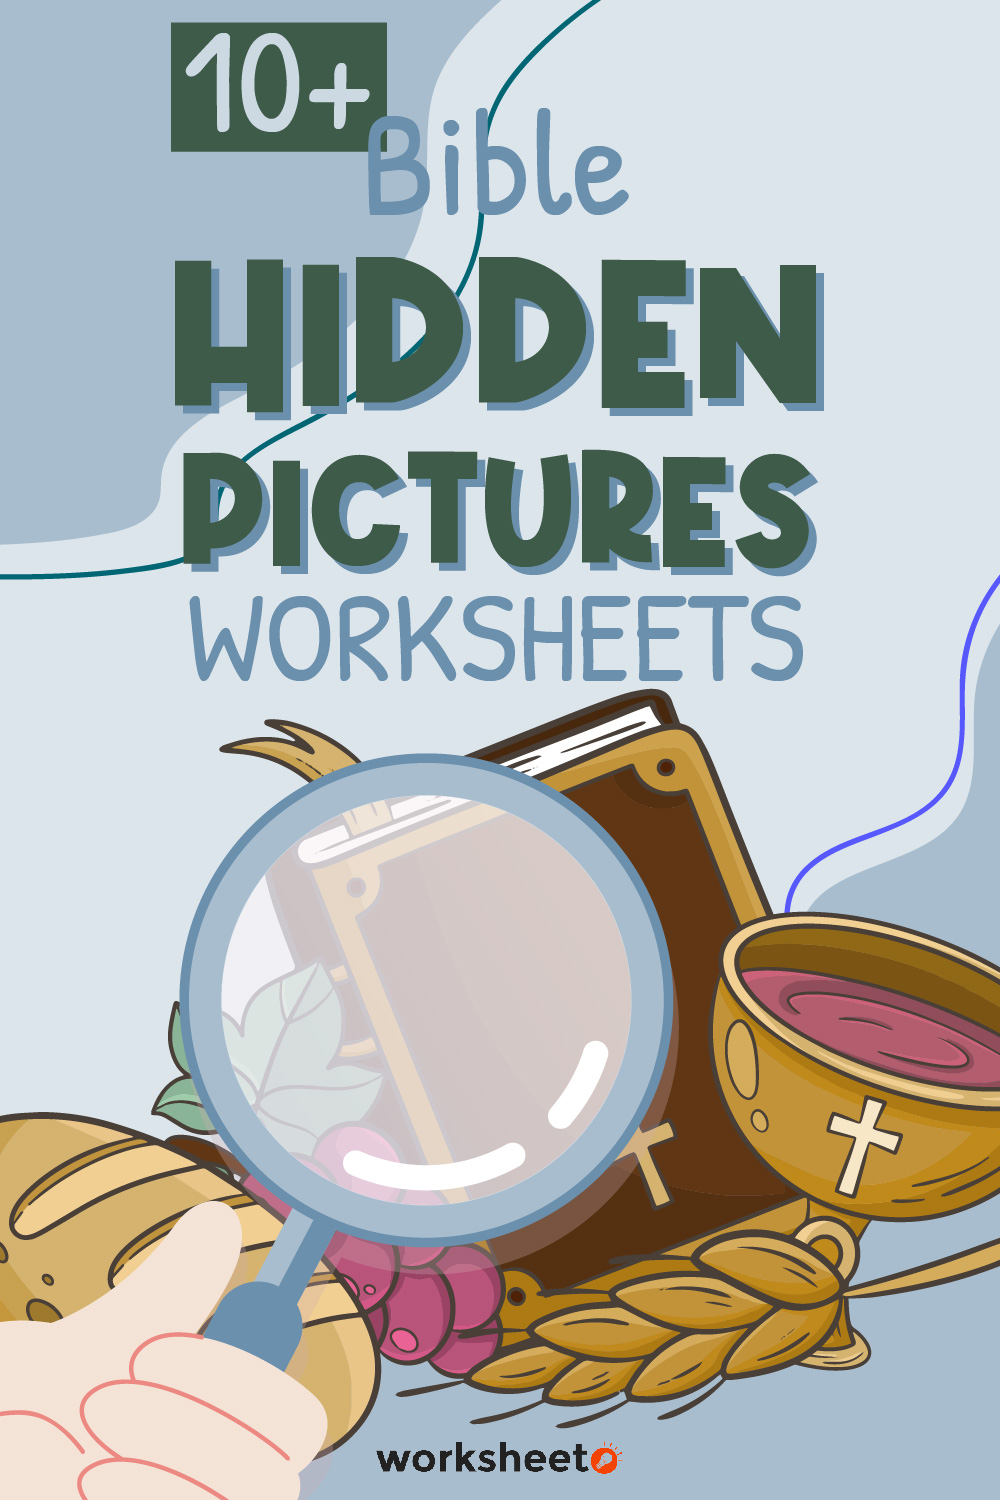 16 Images of Bible Hidden Pictures Worksheets